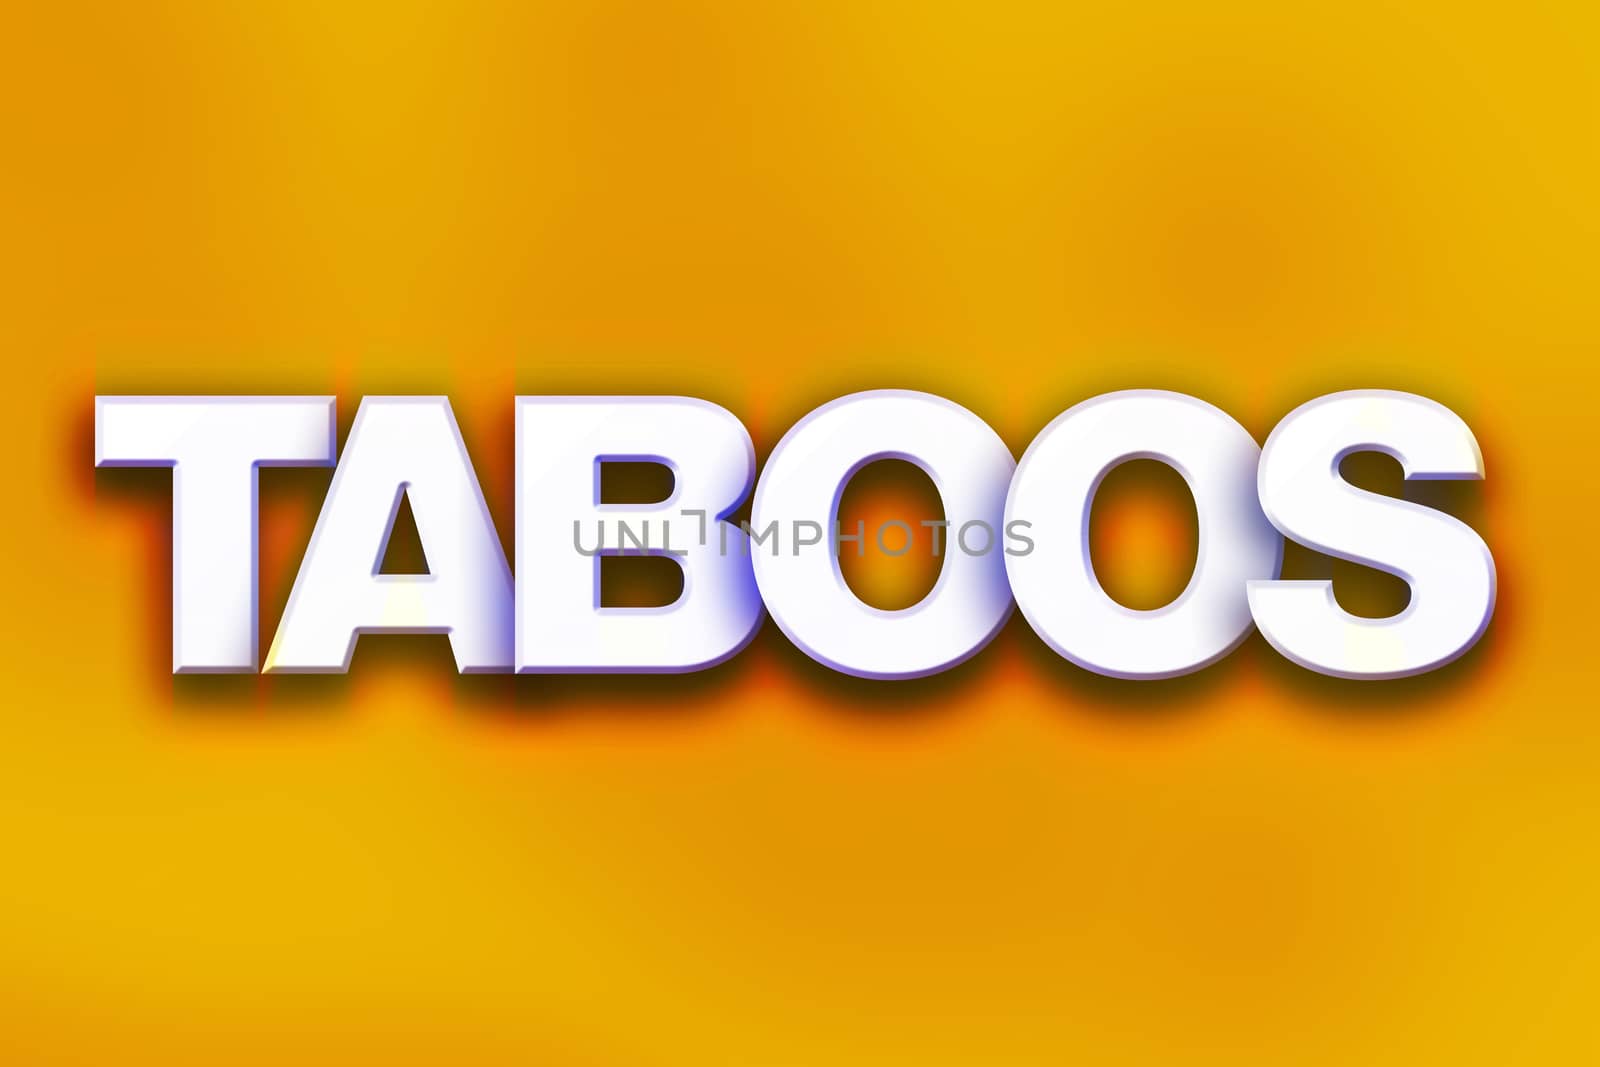 The word "Taboos" written in white 3D letters on a colorful background concept and theme.